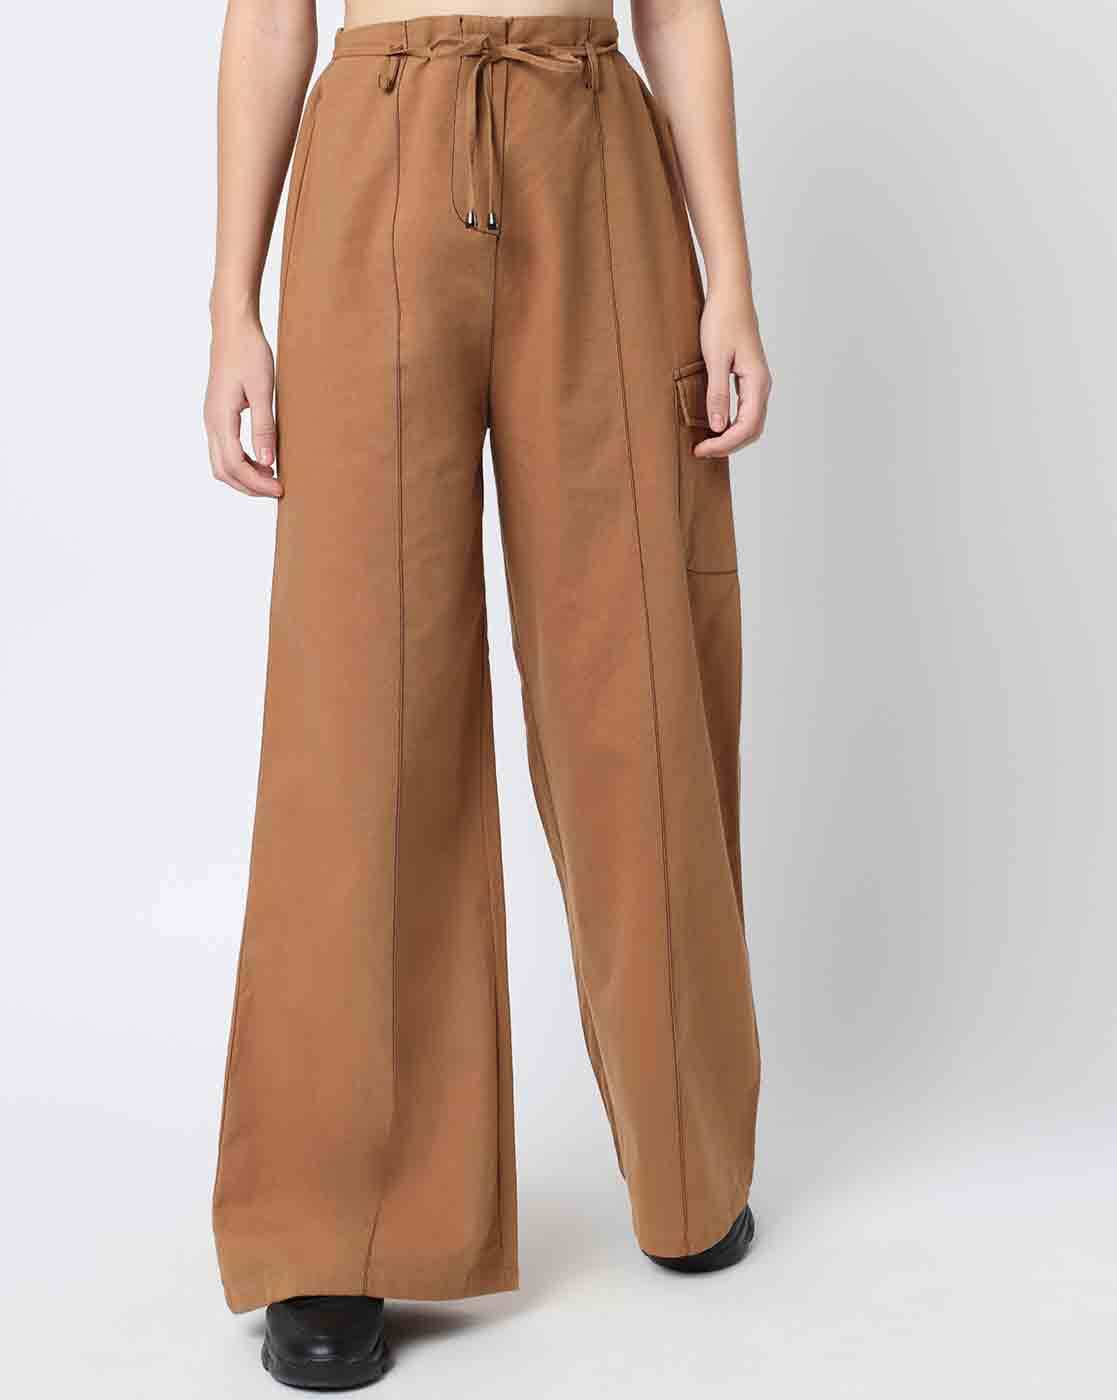 Buy FABALLEY Brown Solid Crepe Regular Fit Womens Wide Leg Trousers   Shoppers Stop